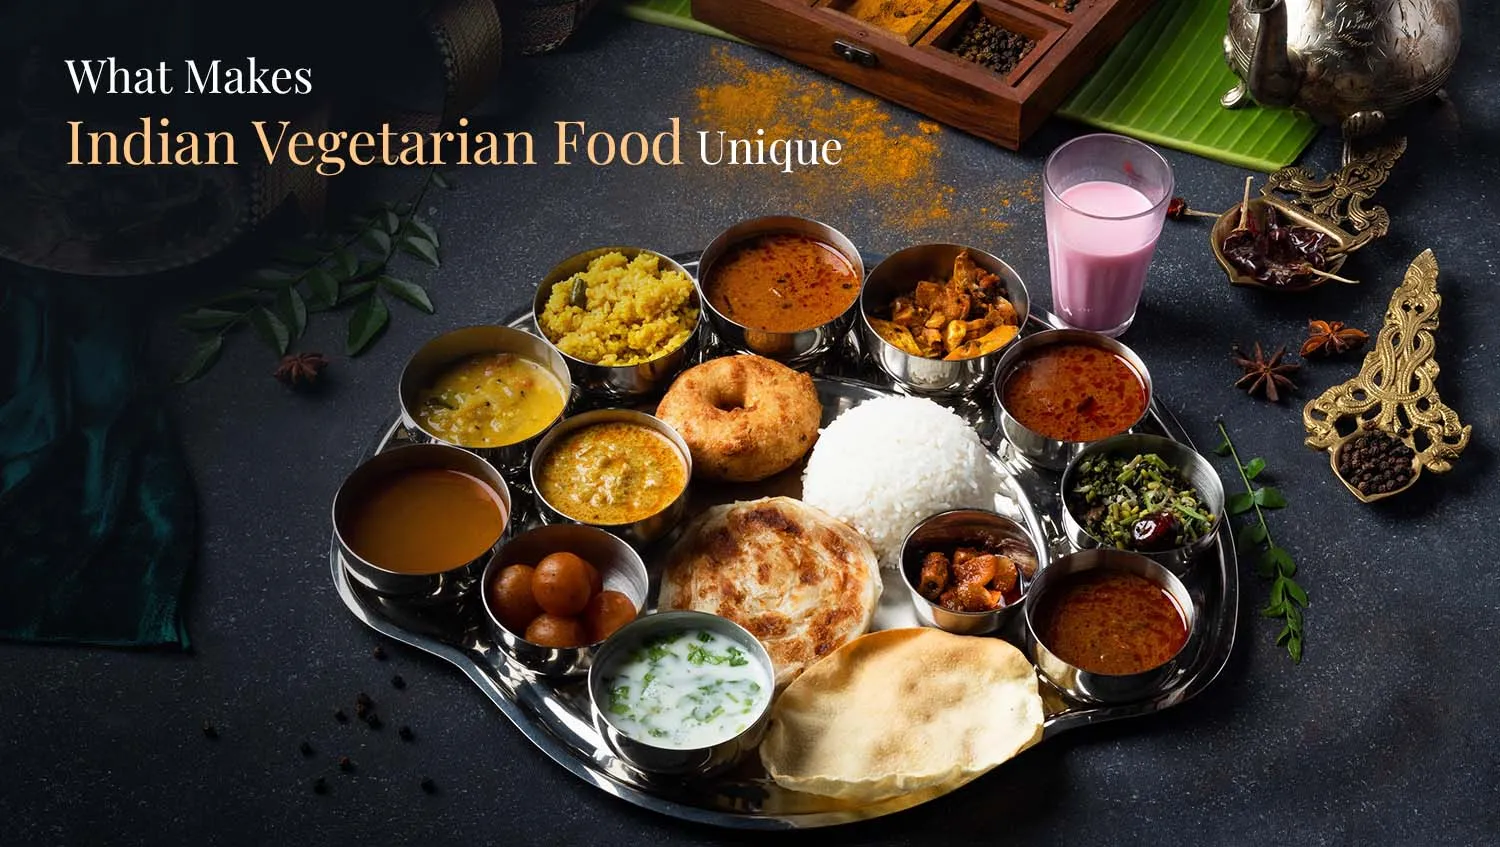 What Makes Indian Vegetarian Food Unique